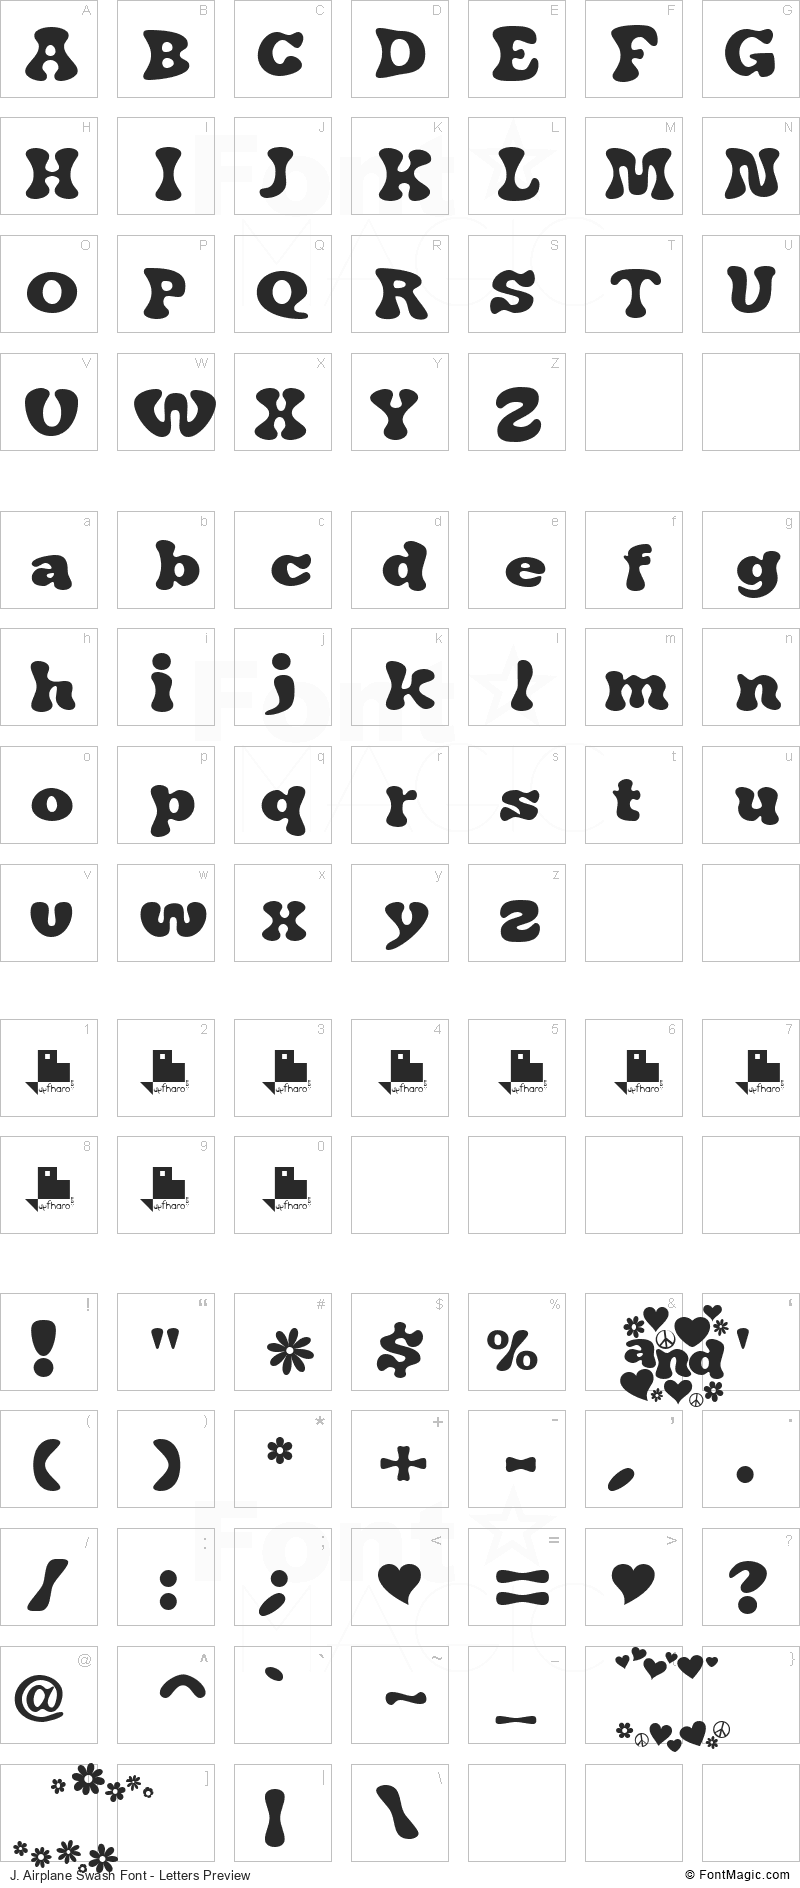 J. Airplane Swash Font - All Latters Preview Chart